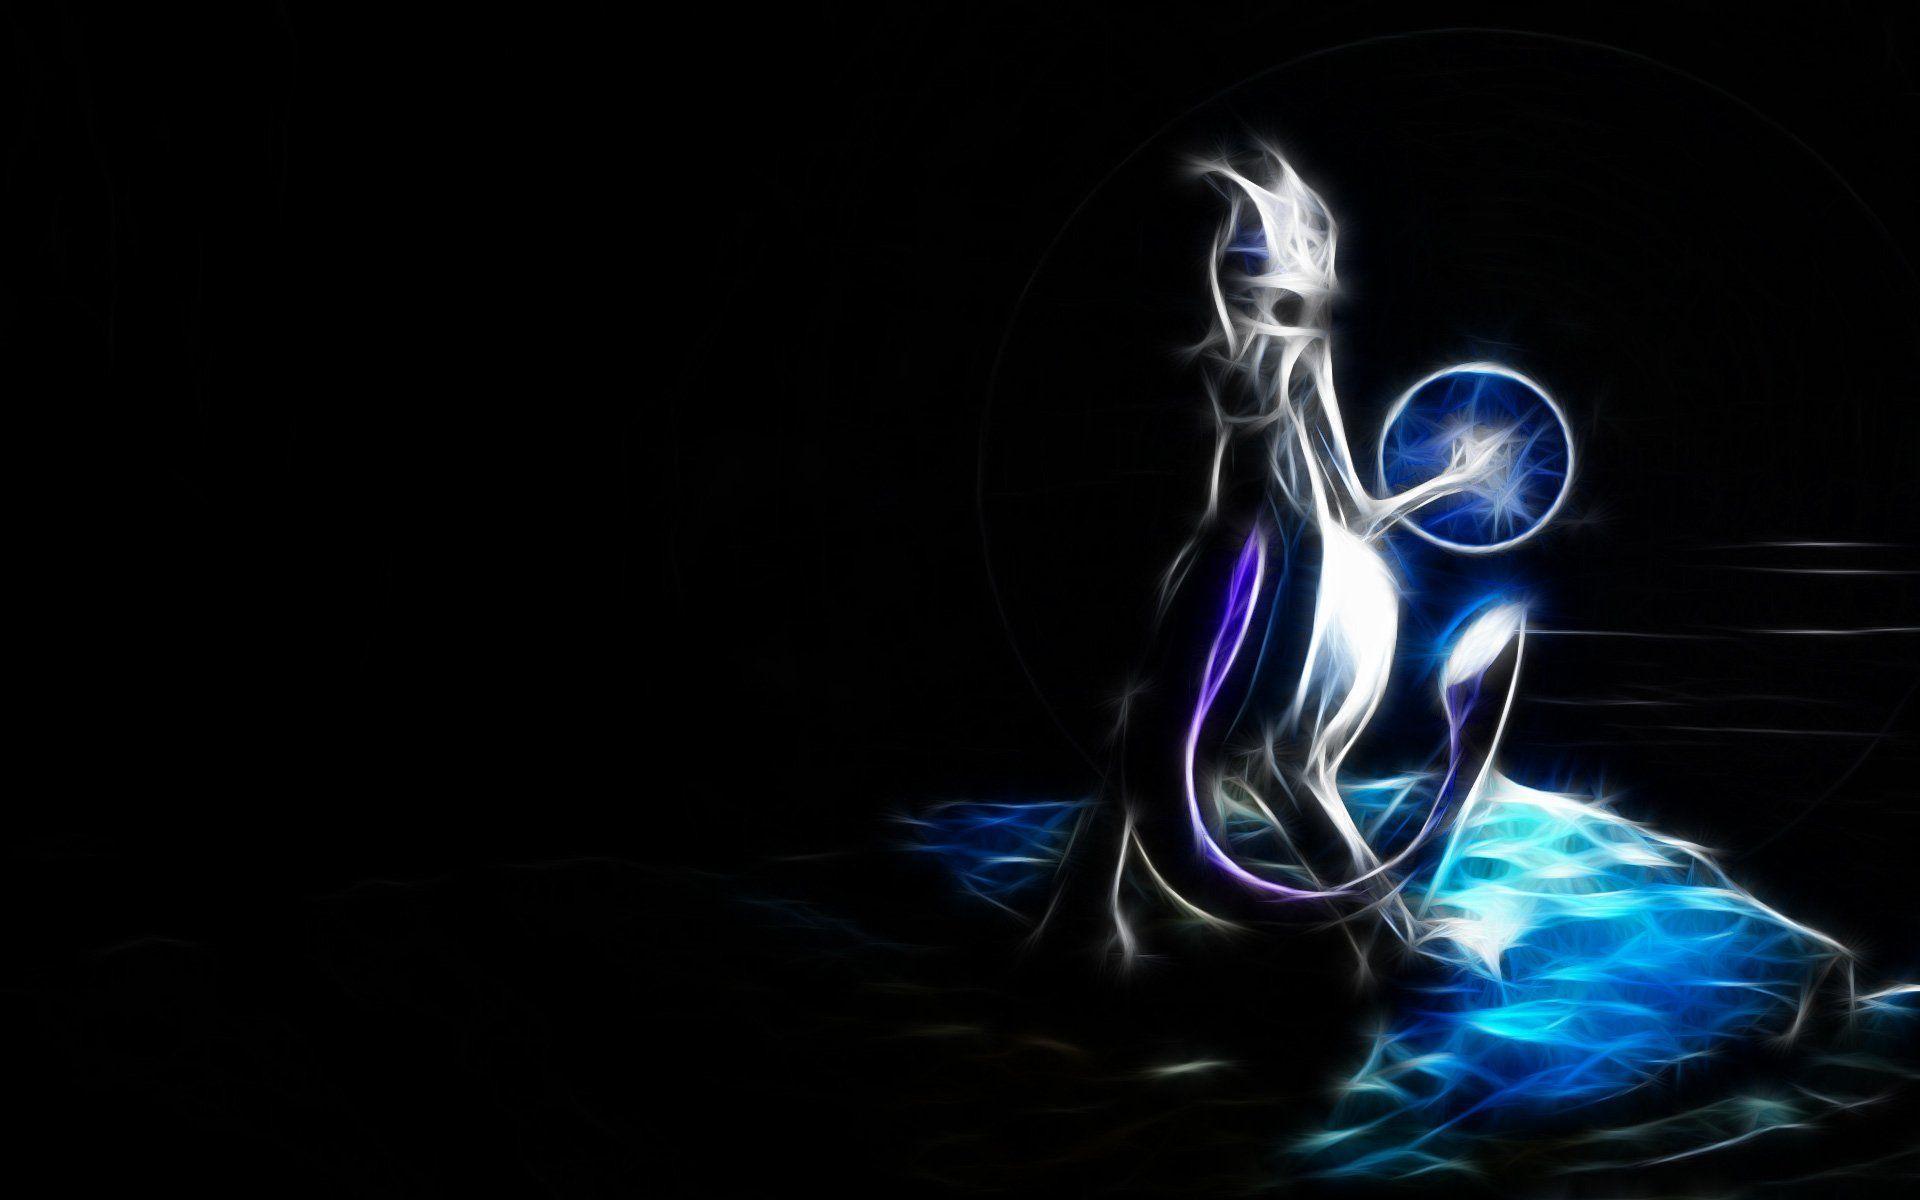 Mewtwo Armor Wallpapers